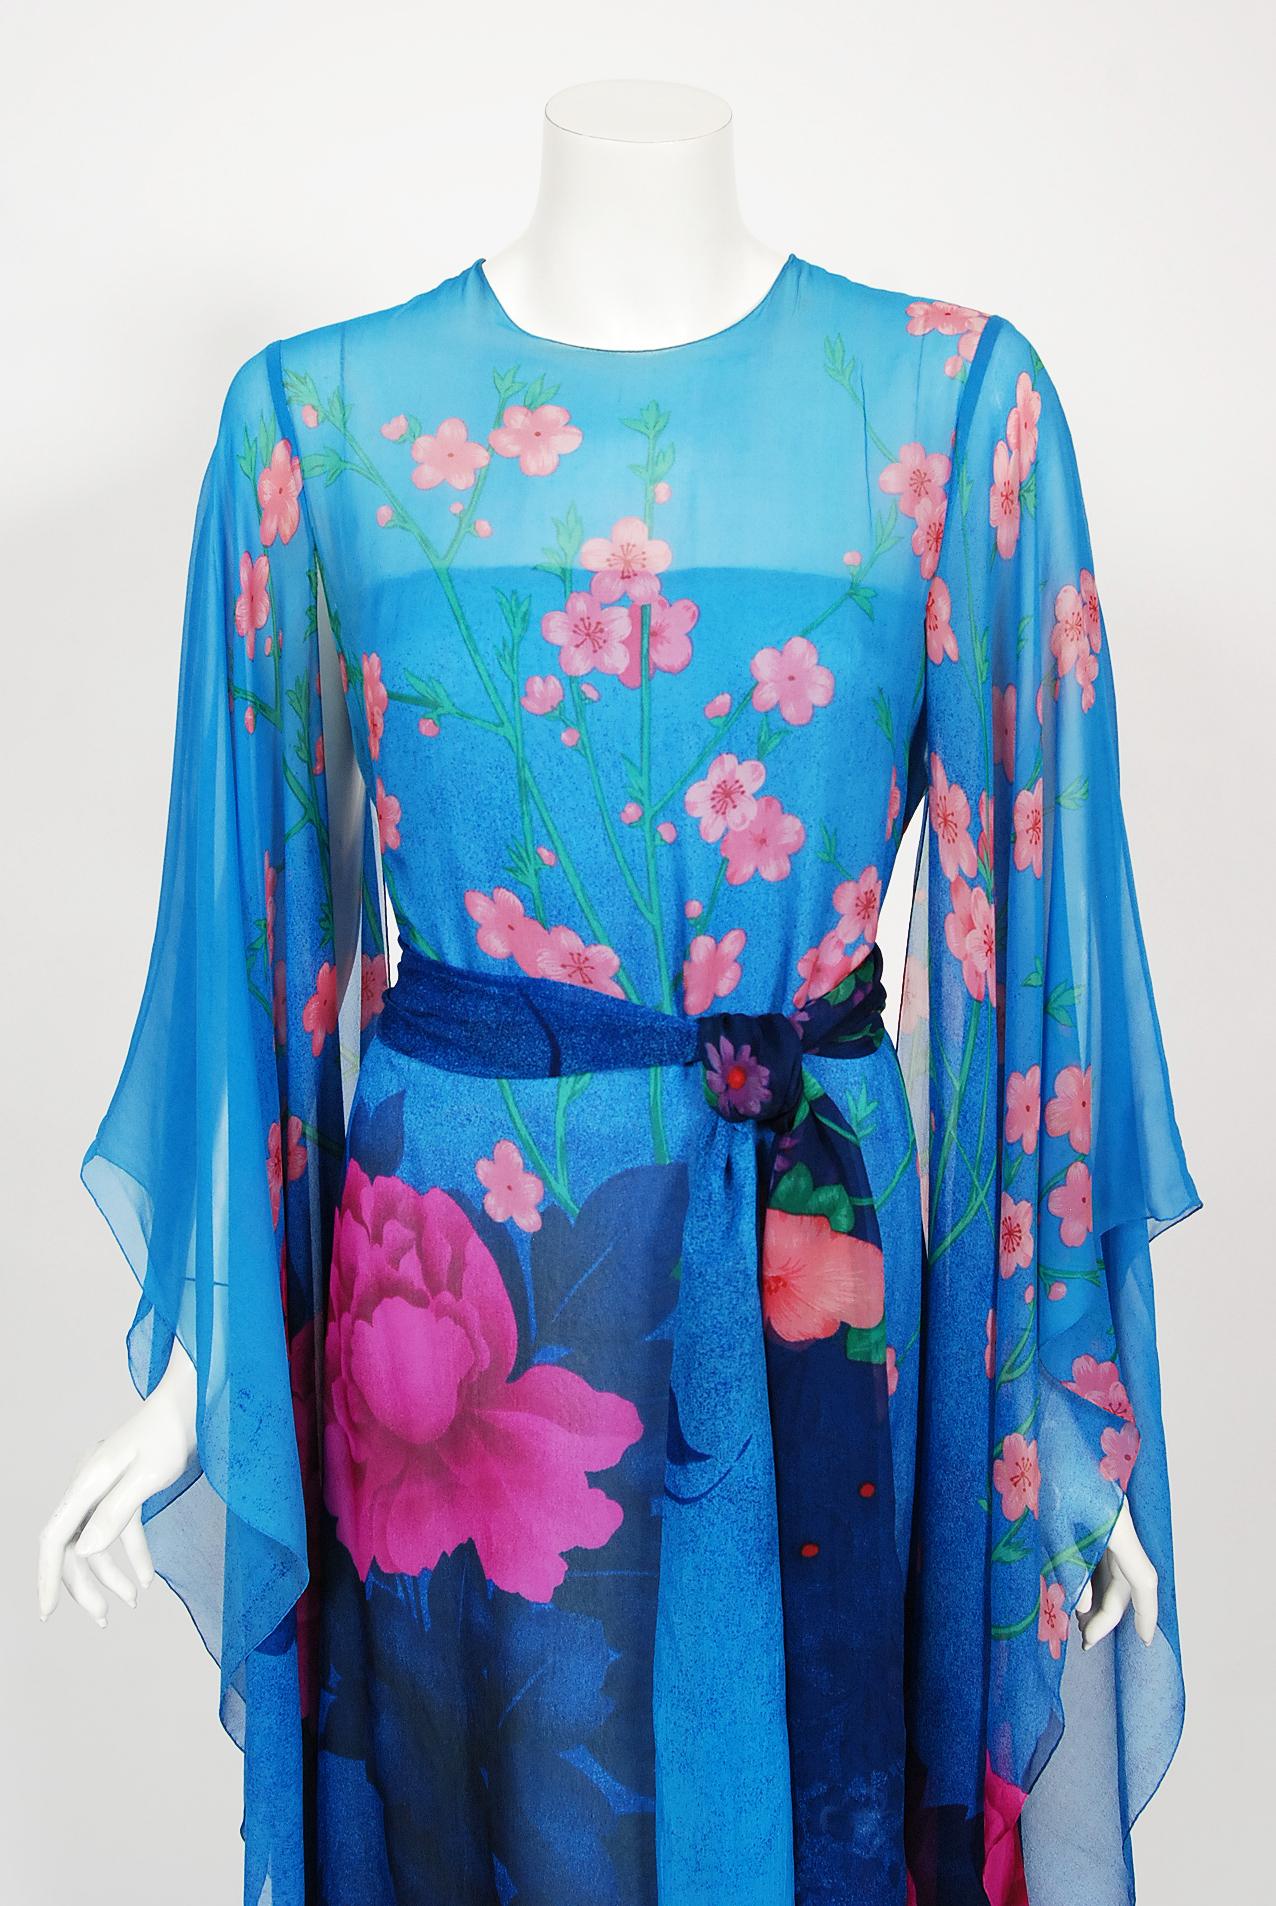 An iconic and instantly recognizable Hanae Mori couture kimono-sleeve gown dating back to her 1975-76 collection. Whilst on a Paris holiday in 1960, Mori had a fateful fitting with Coco Chanel. She claimed this meeting changed her life and she